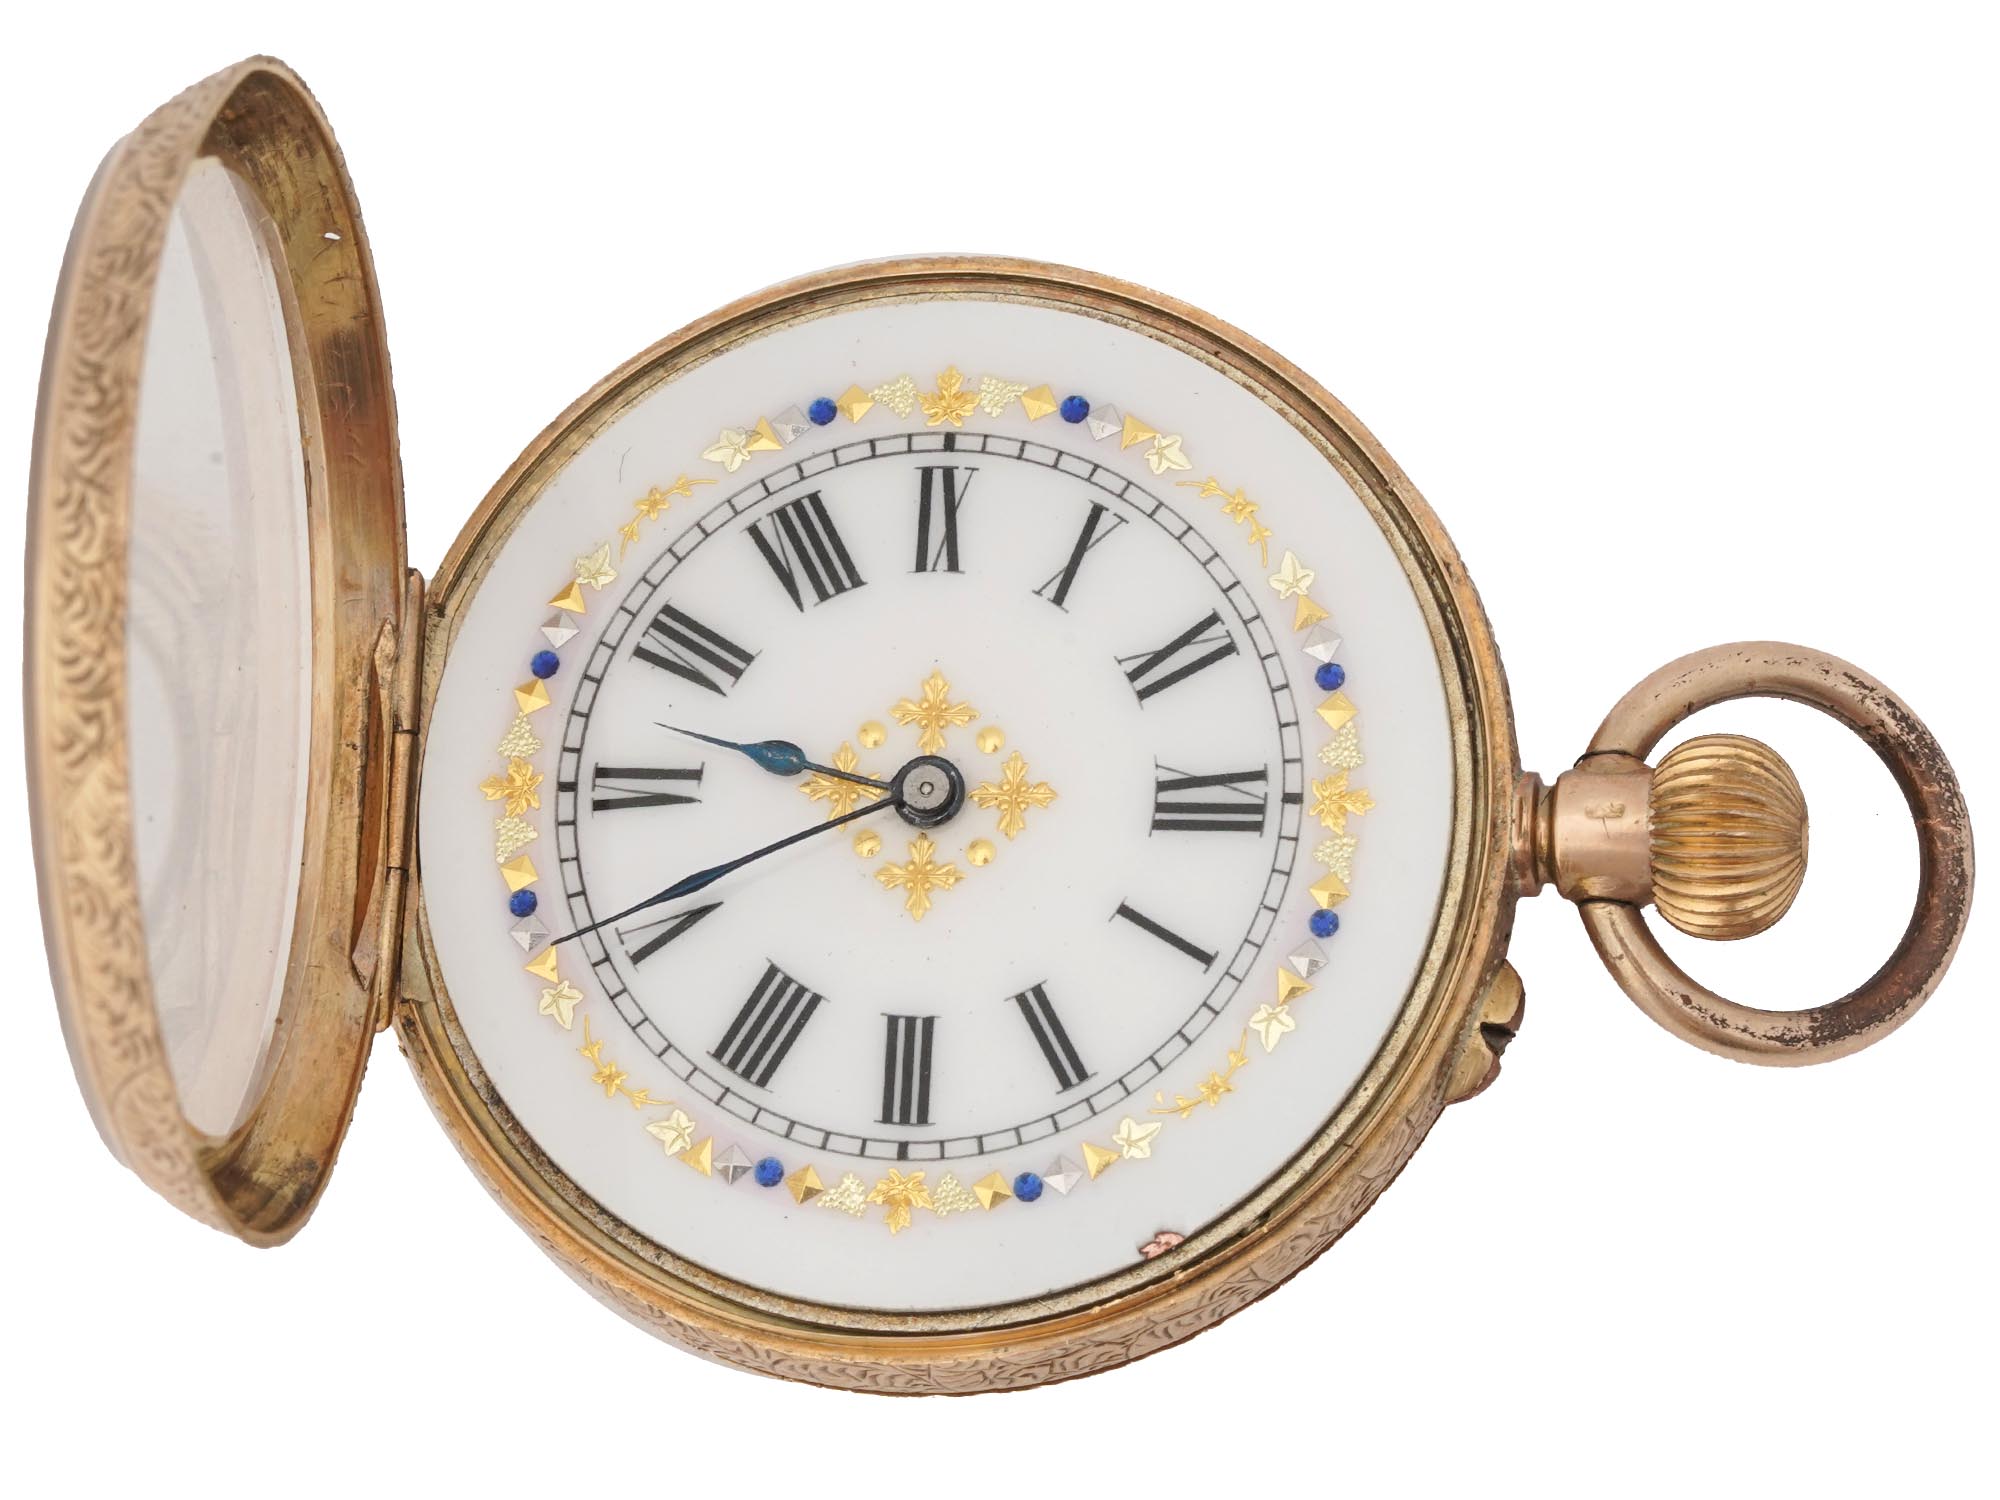 14K YELLOW GOLD AND JEWELS CUIVRE POCKET WATCH PIC-2